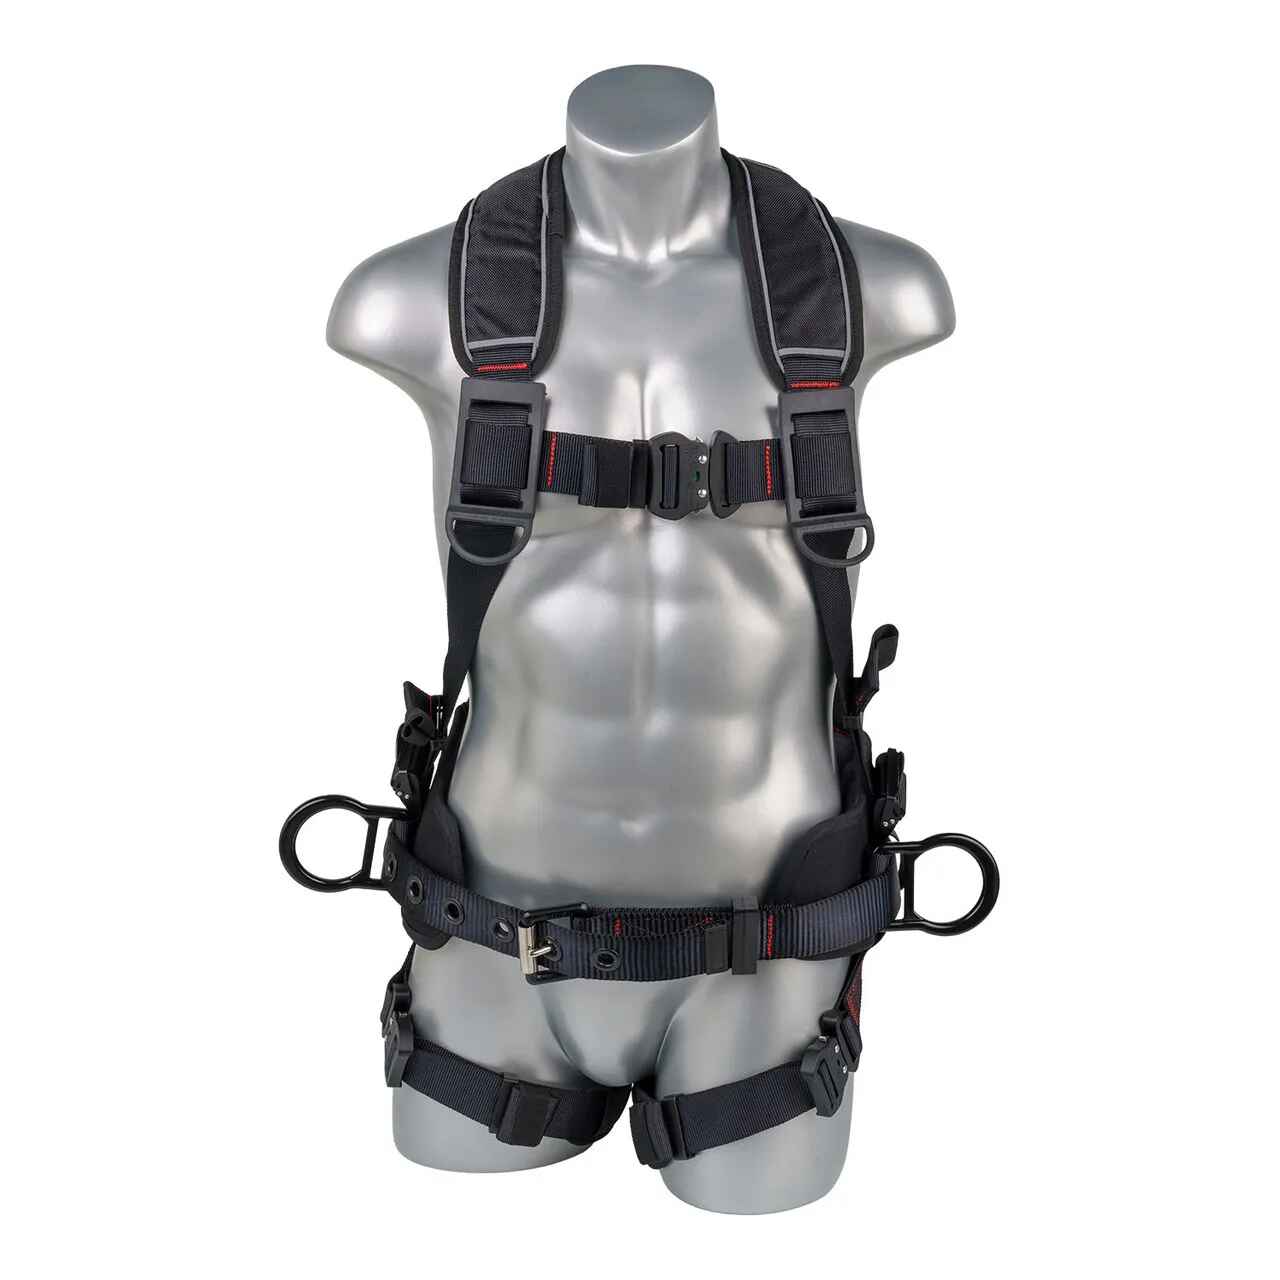 Construction Safety Harness 5 Point, QCB, Padded Back, Grommet Legs